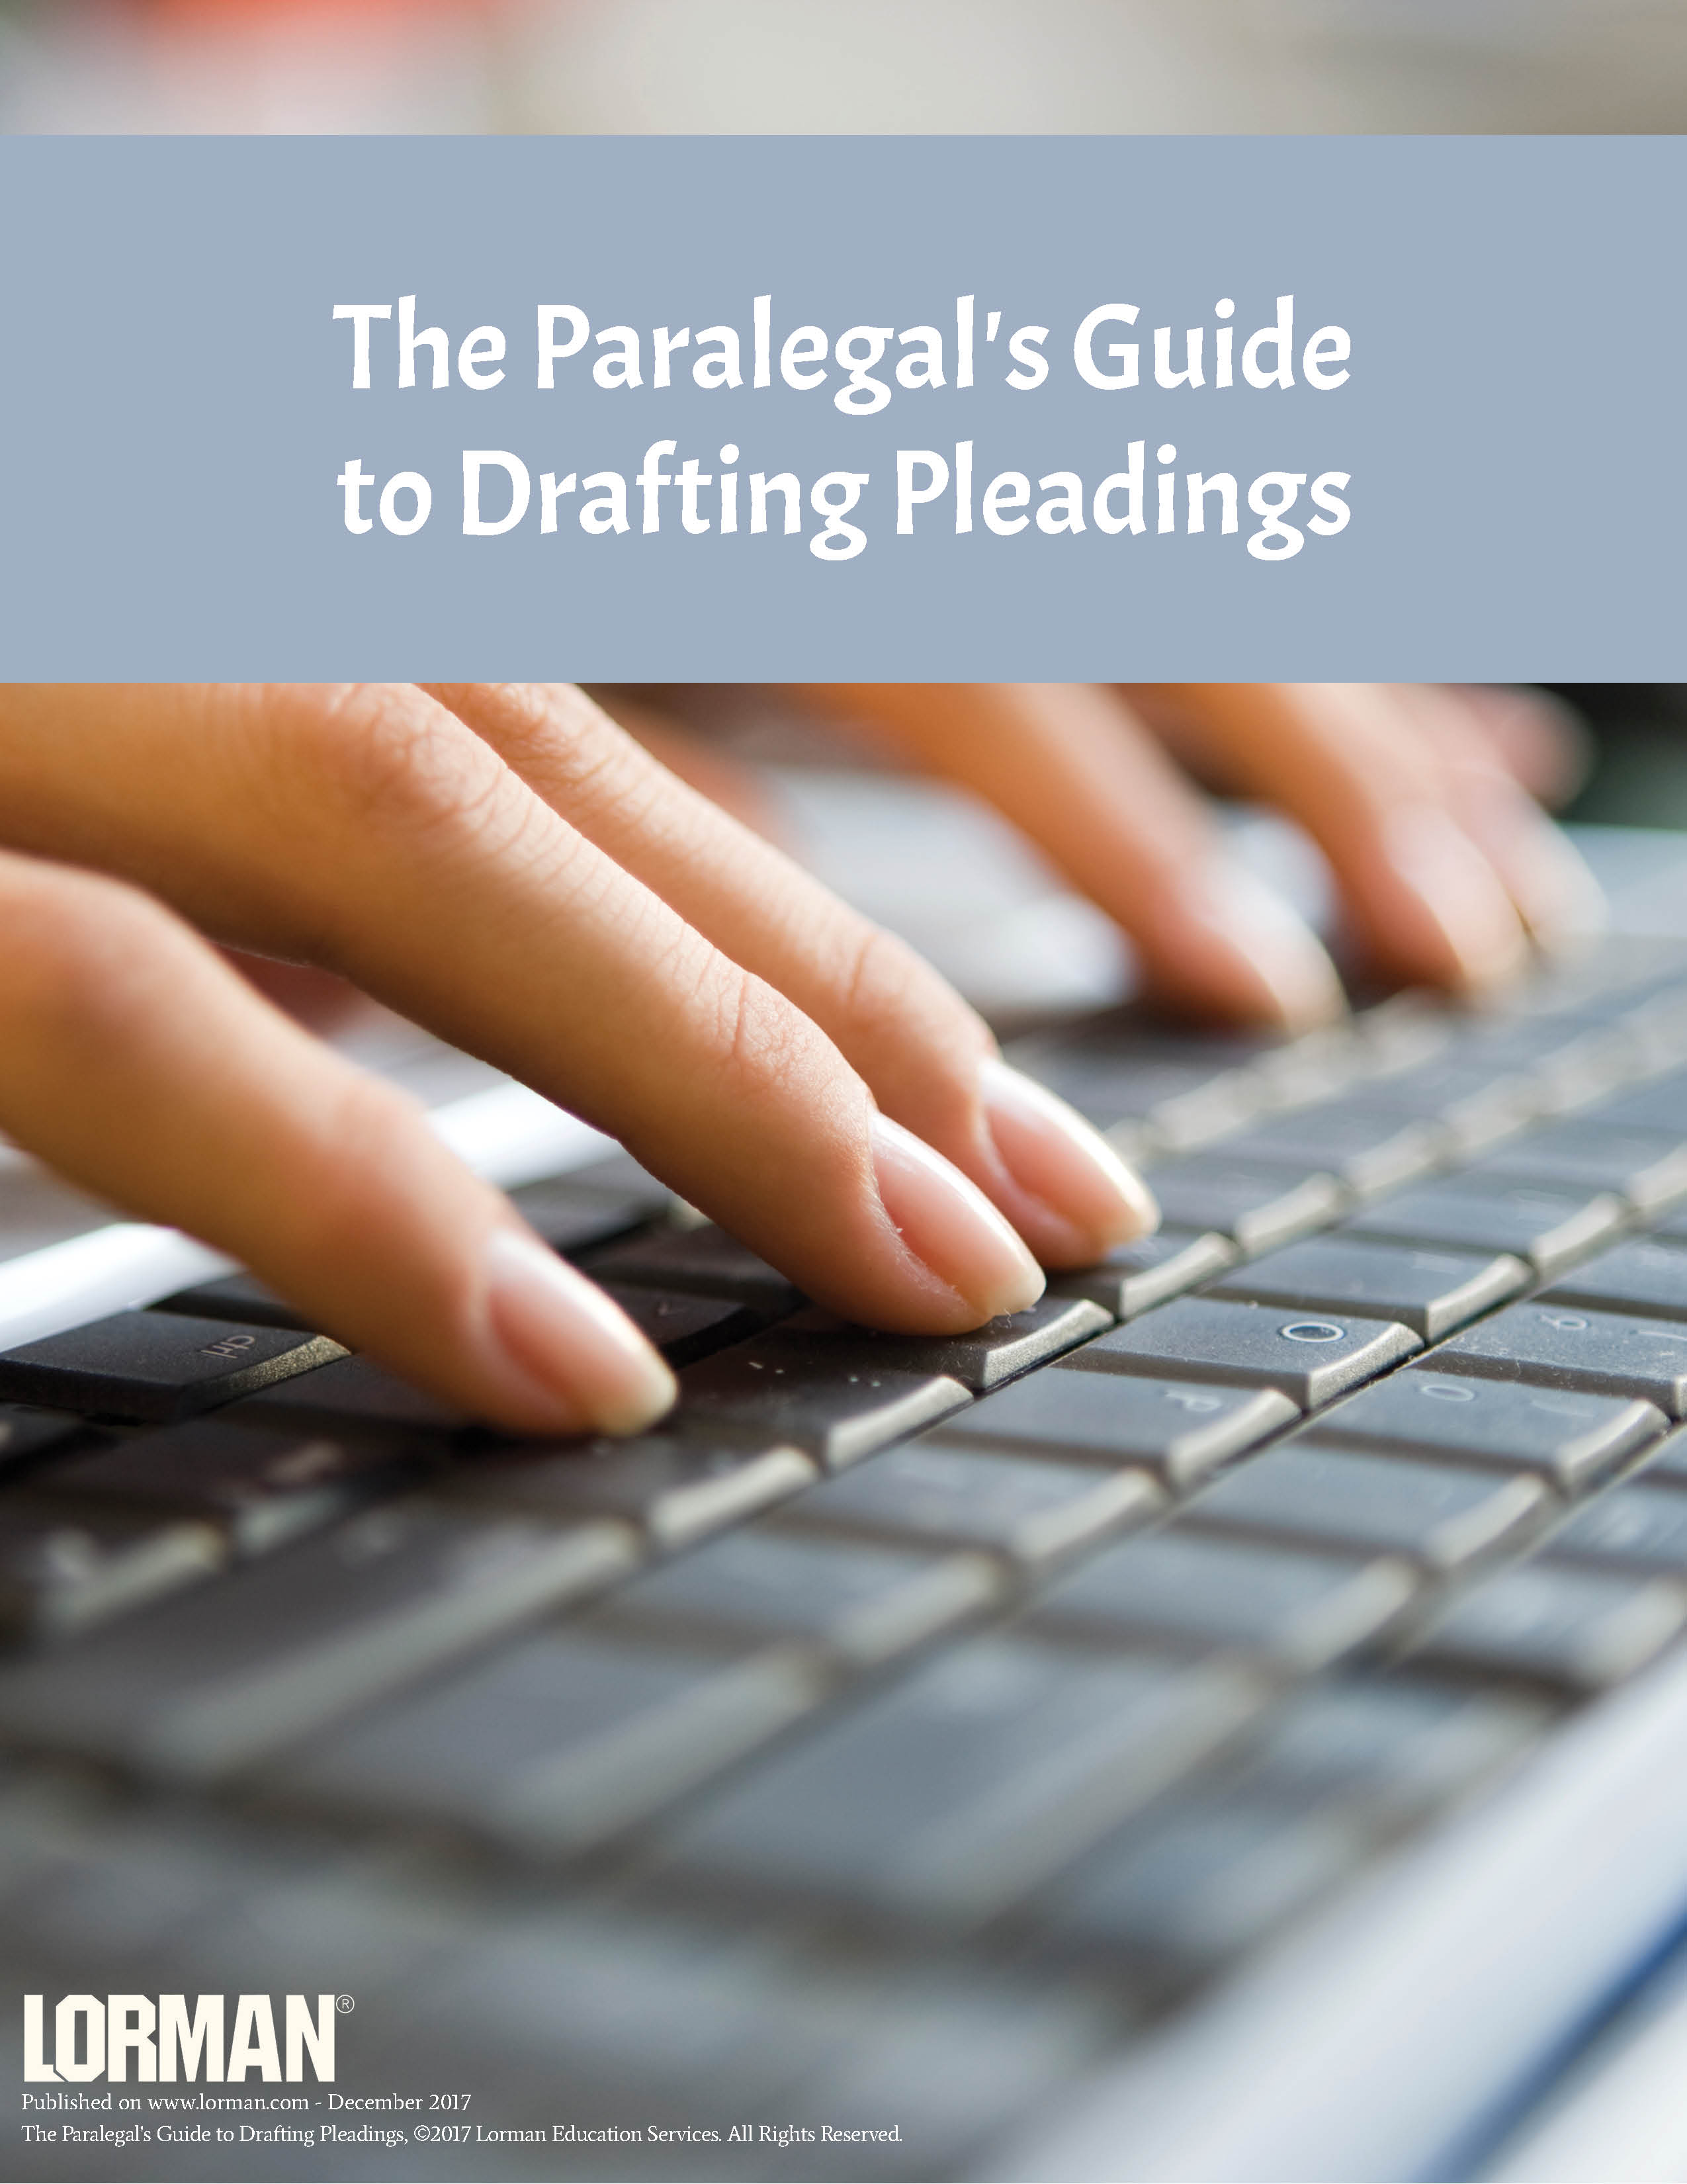 The Paralegal's Guide to Drafting Pleadings